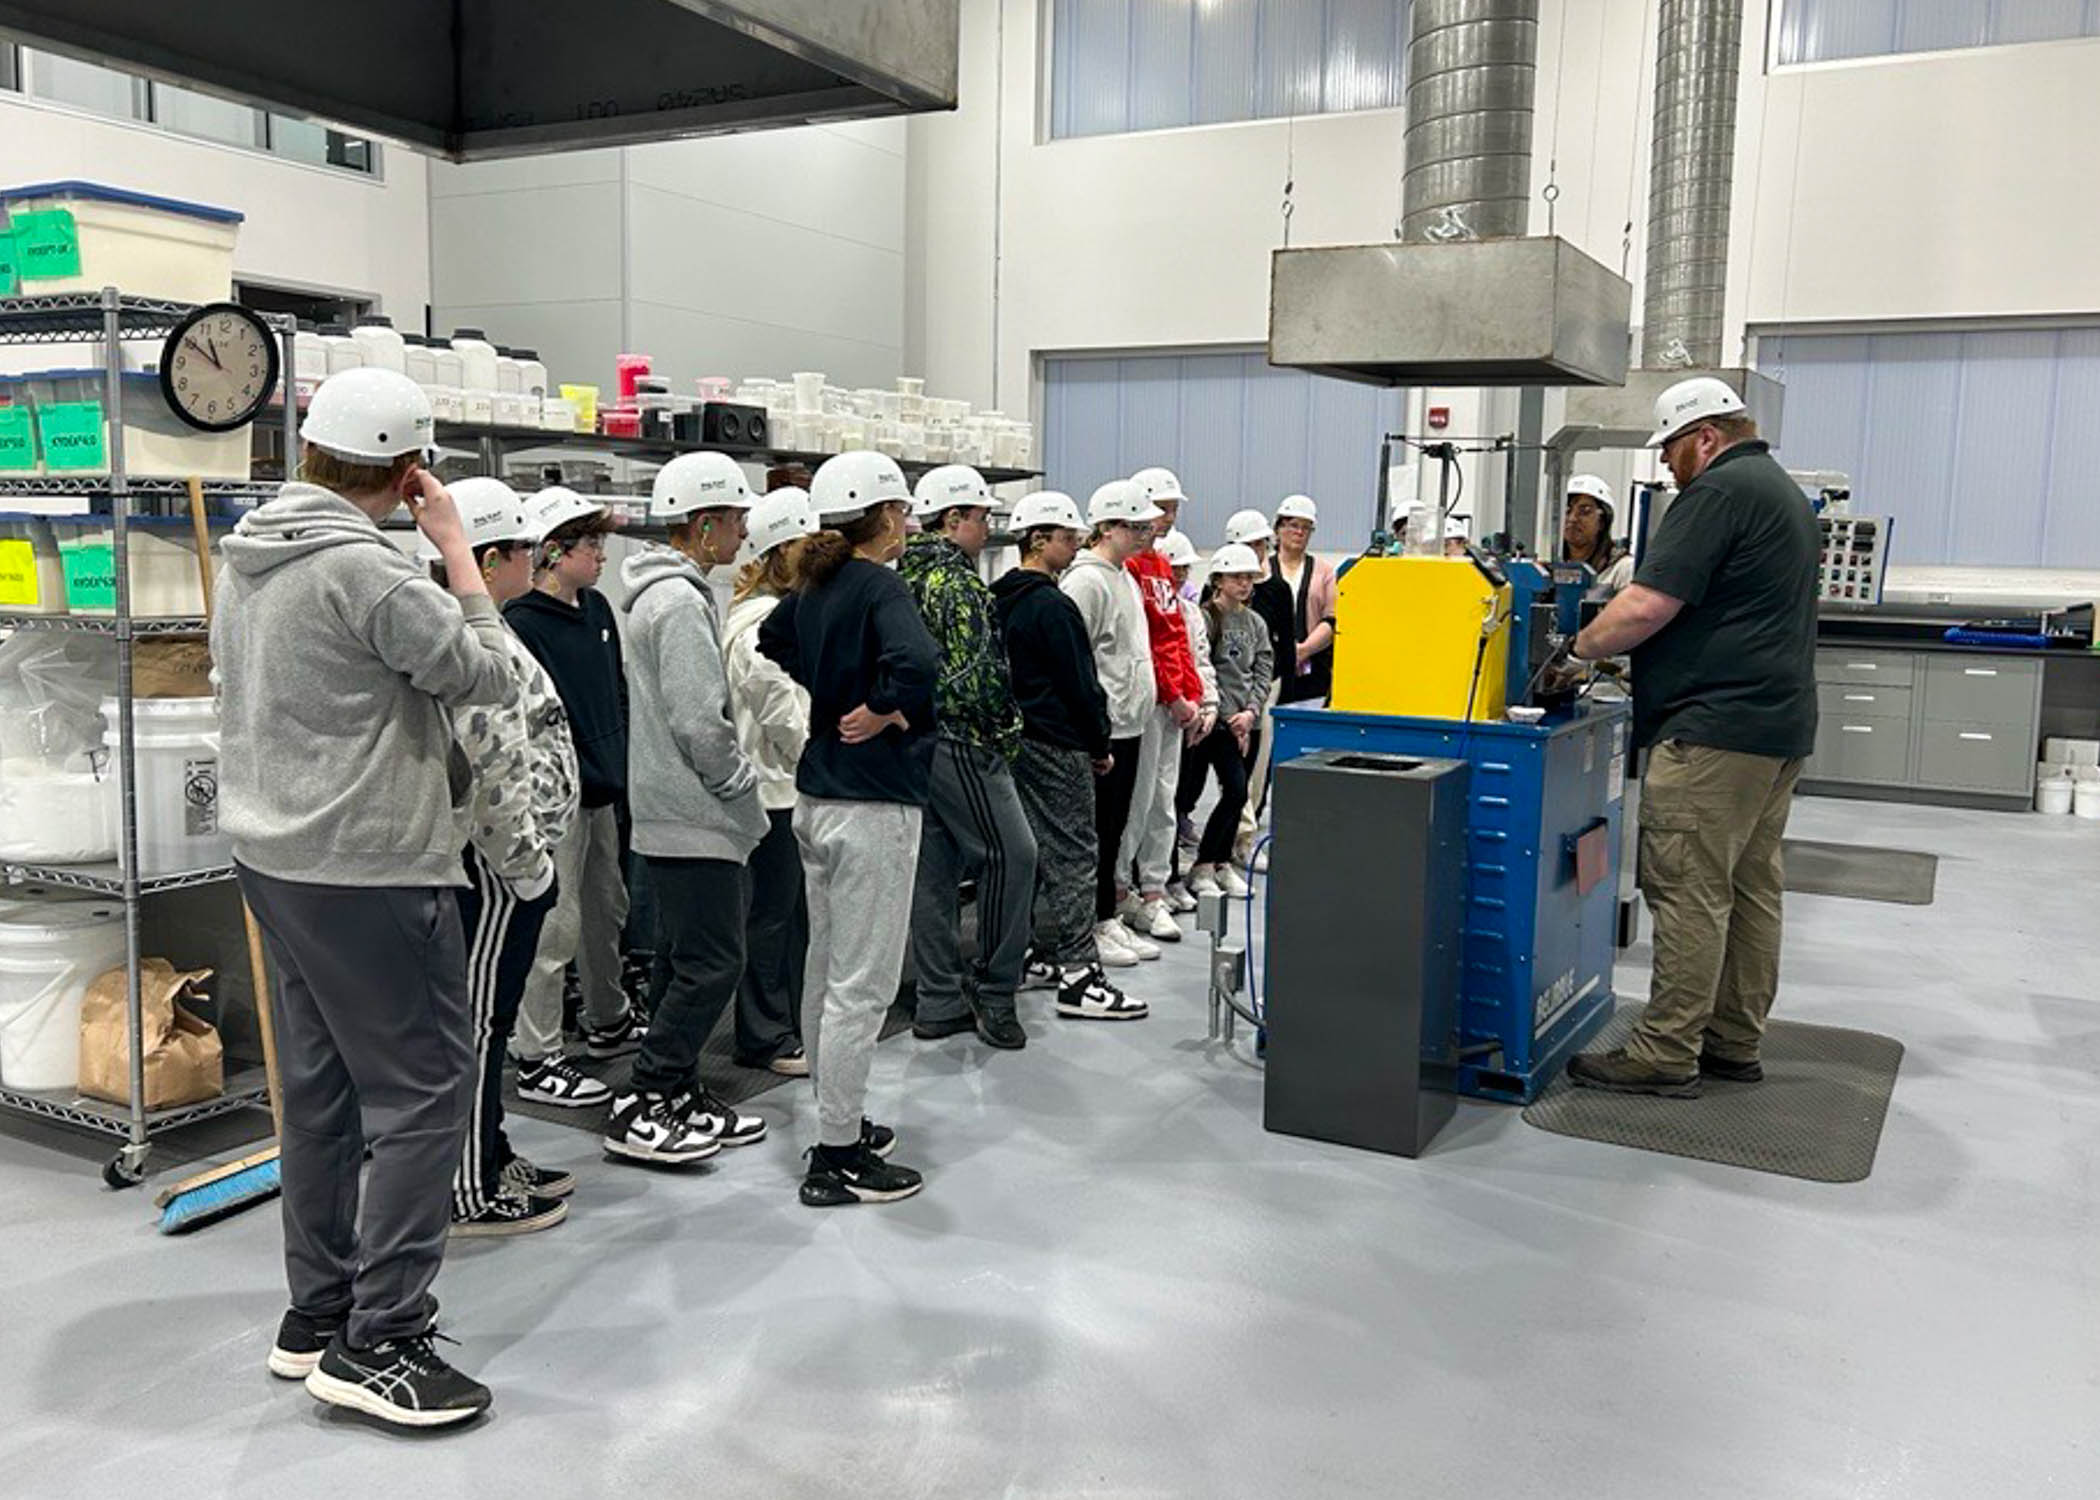 Penn College supports students’ visit to Sekisui Kydex